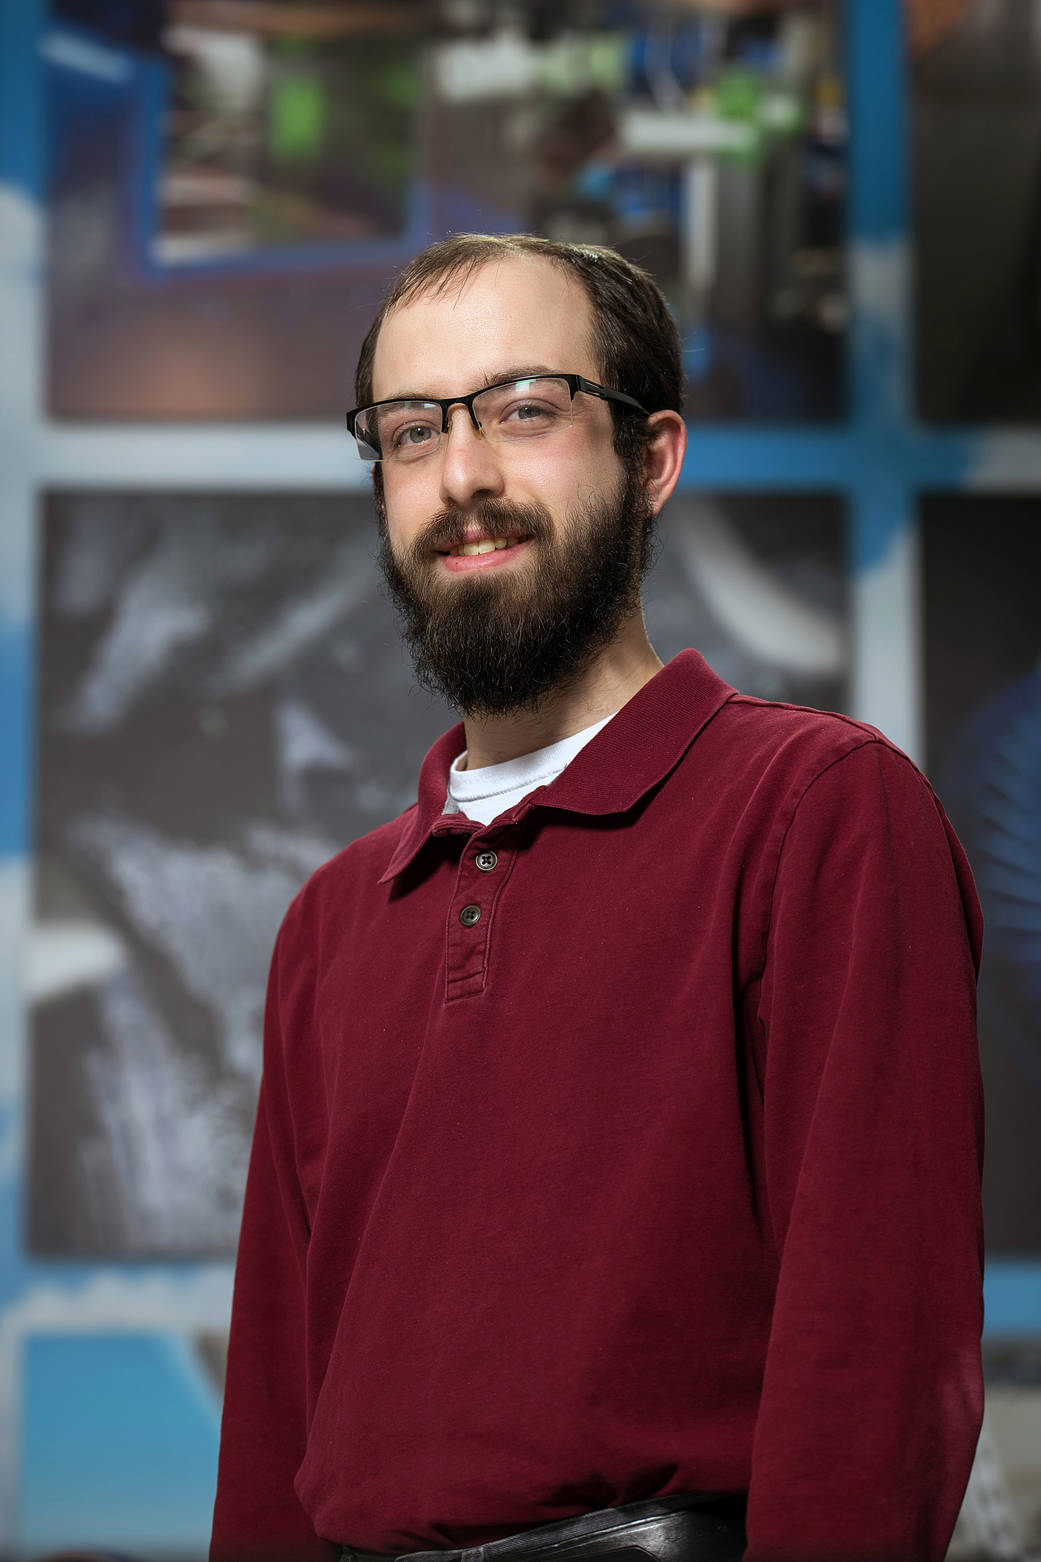 Young engineer wearing glasses and burgundy shirt smiles at camera in front of blurred background.